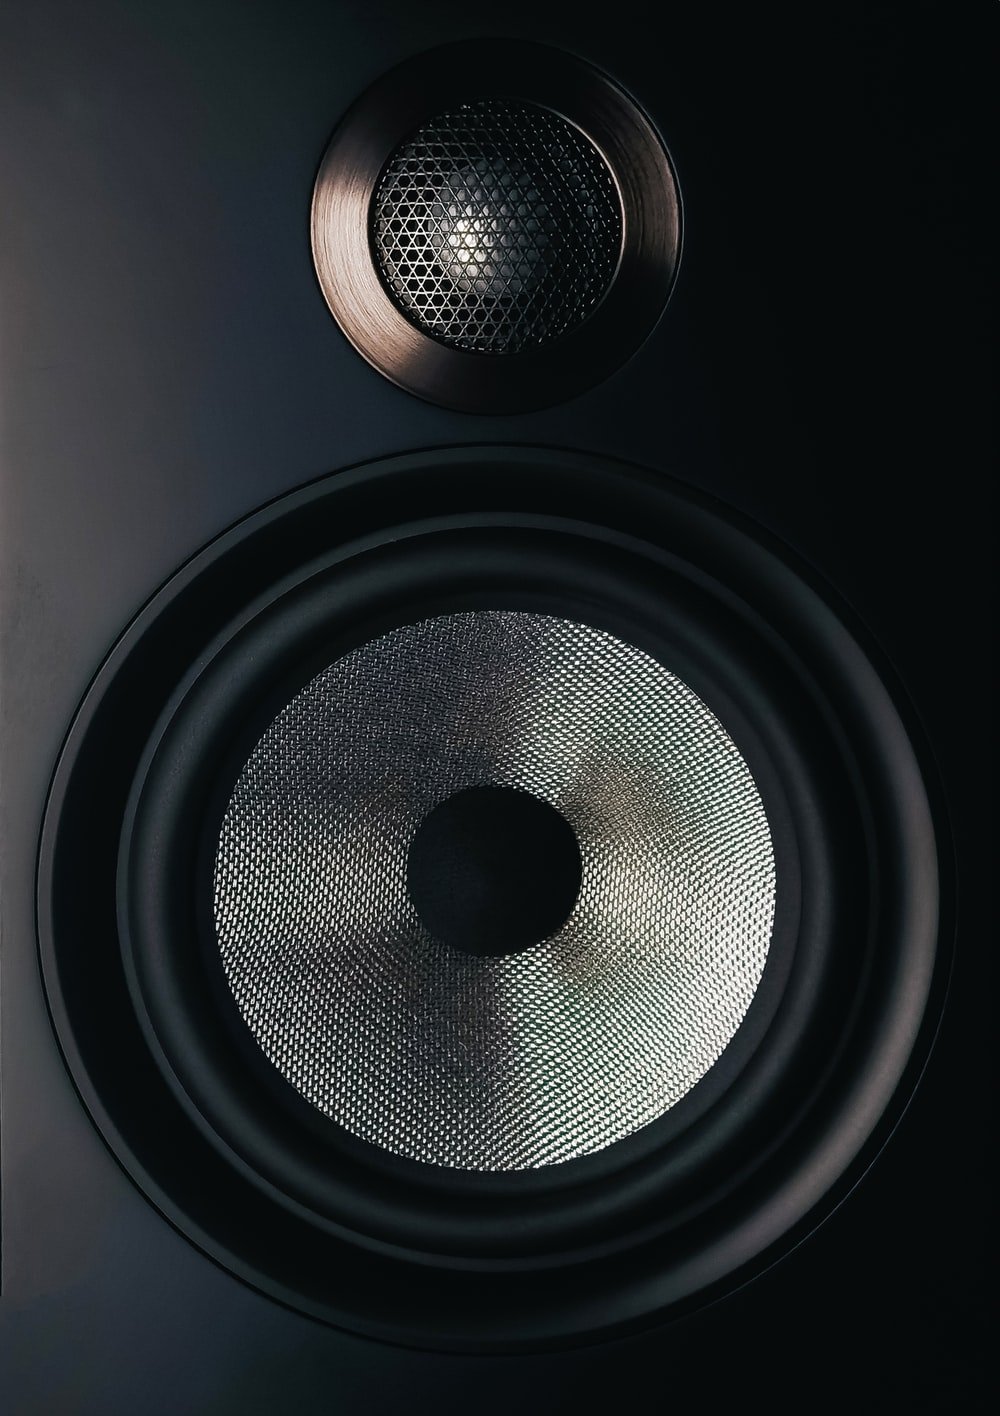 Speaker Picture [HD]. Download Free Image